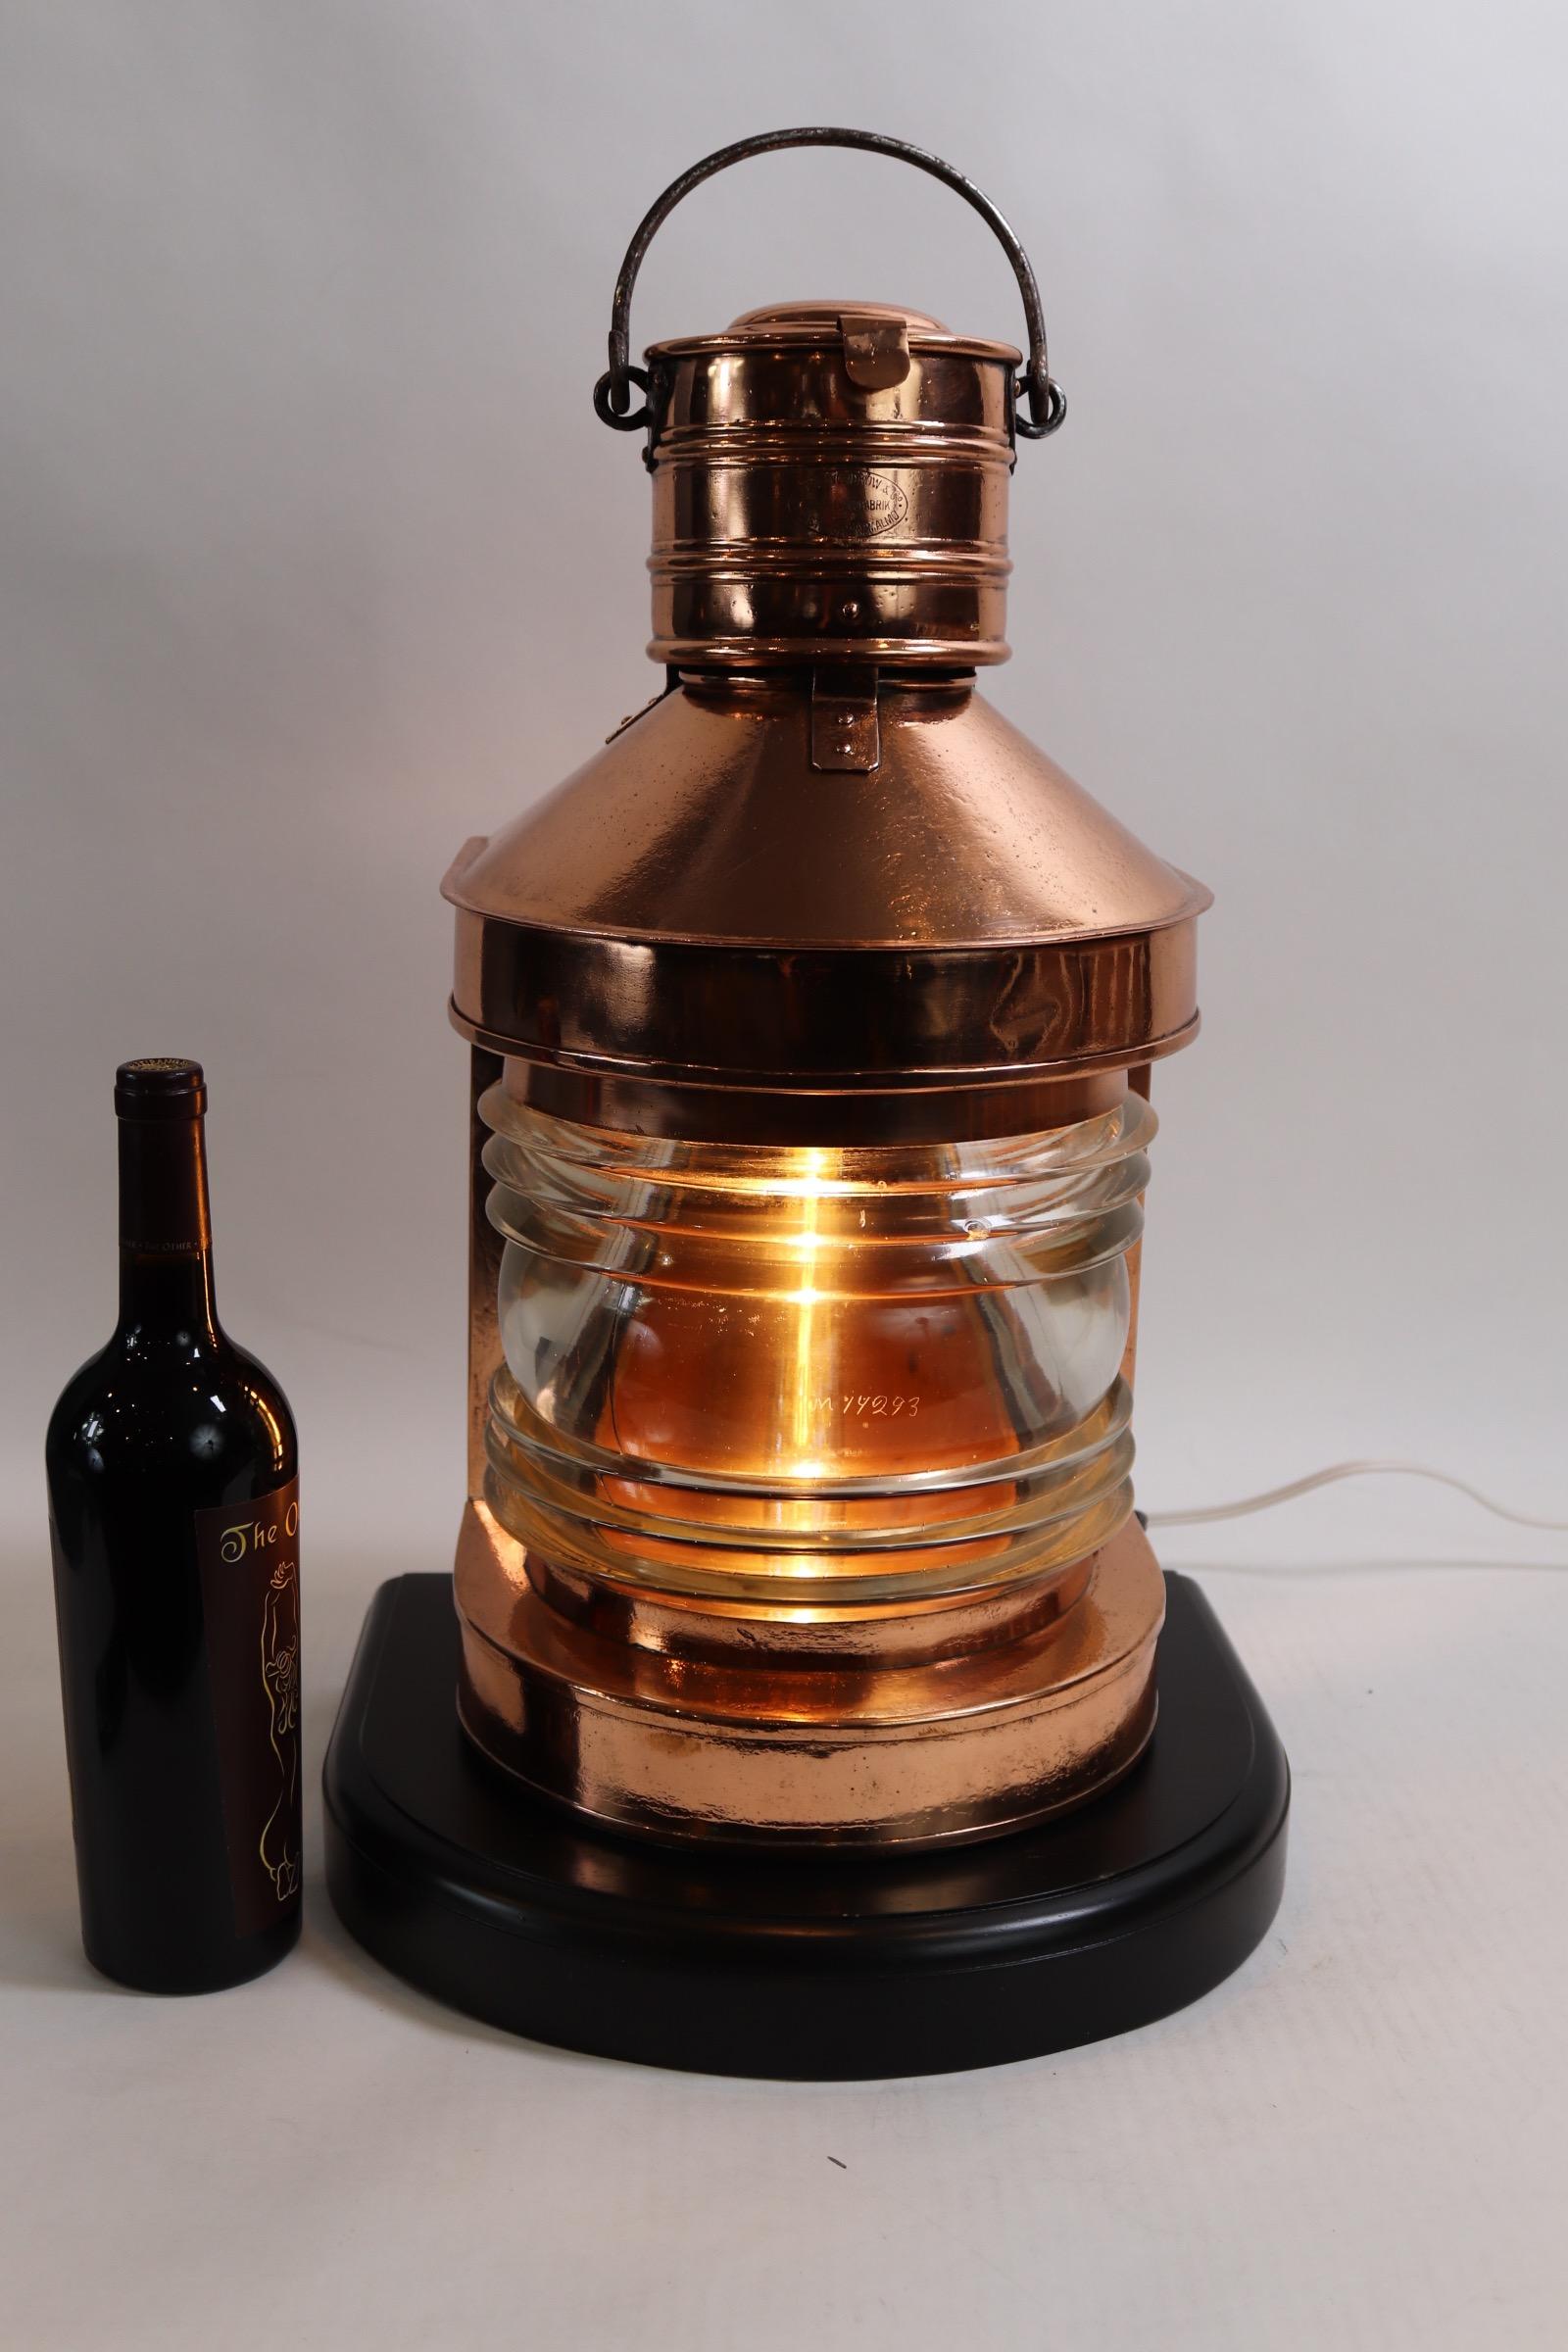 Polished copper ships masthead lantern engraved on chimney with makers name Georg Wosidkow & Co., Vastergatan Sweden. With clear glass Fresnel lens, hinged rear door, Royal hallmark on door. Lantern is mounted on a thick mahogany base with dark rich